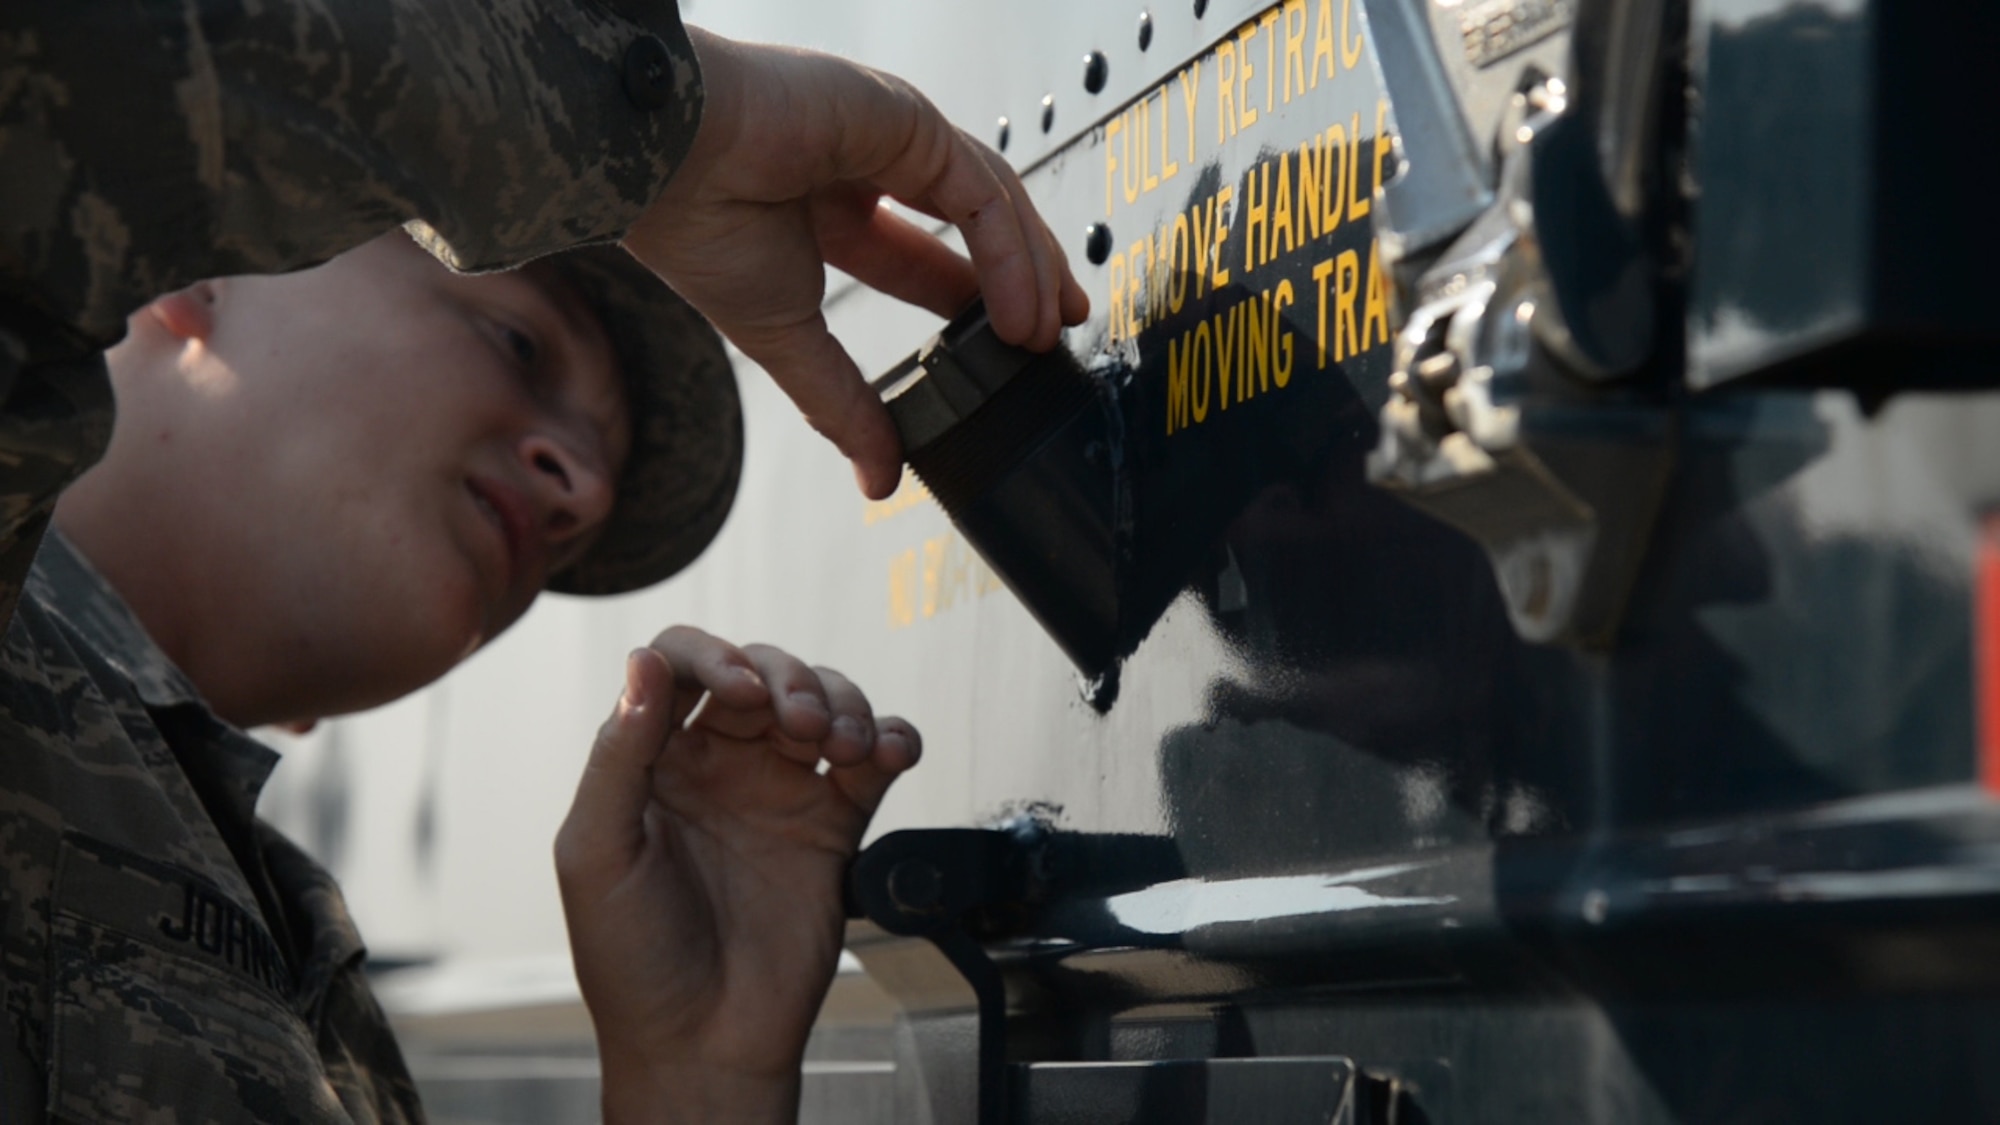 Airman 1st Class Gavin Johnson, 341st Missile Maintenance Squadron tool room technician, inspects a periodic maintenance vehicle Aug. 1, 2017, at Malmstrom Air Force Base, Mont.